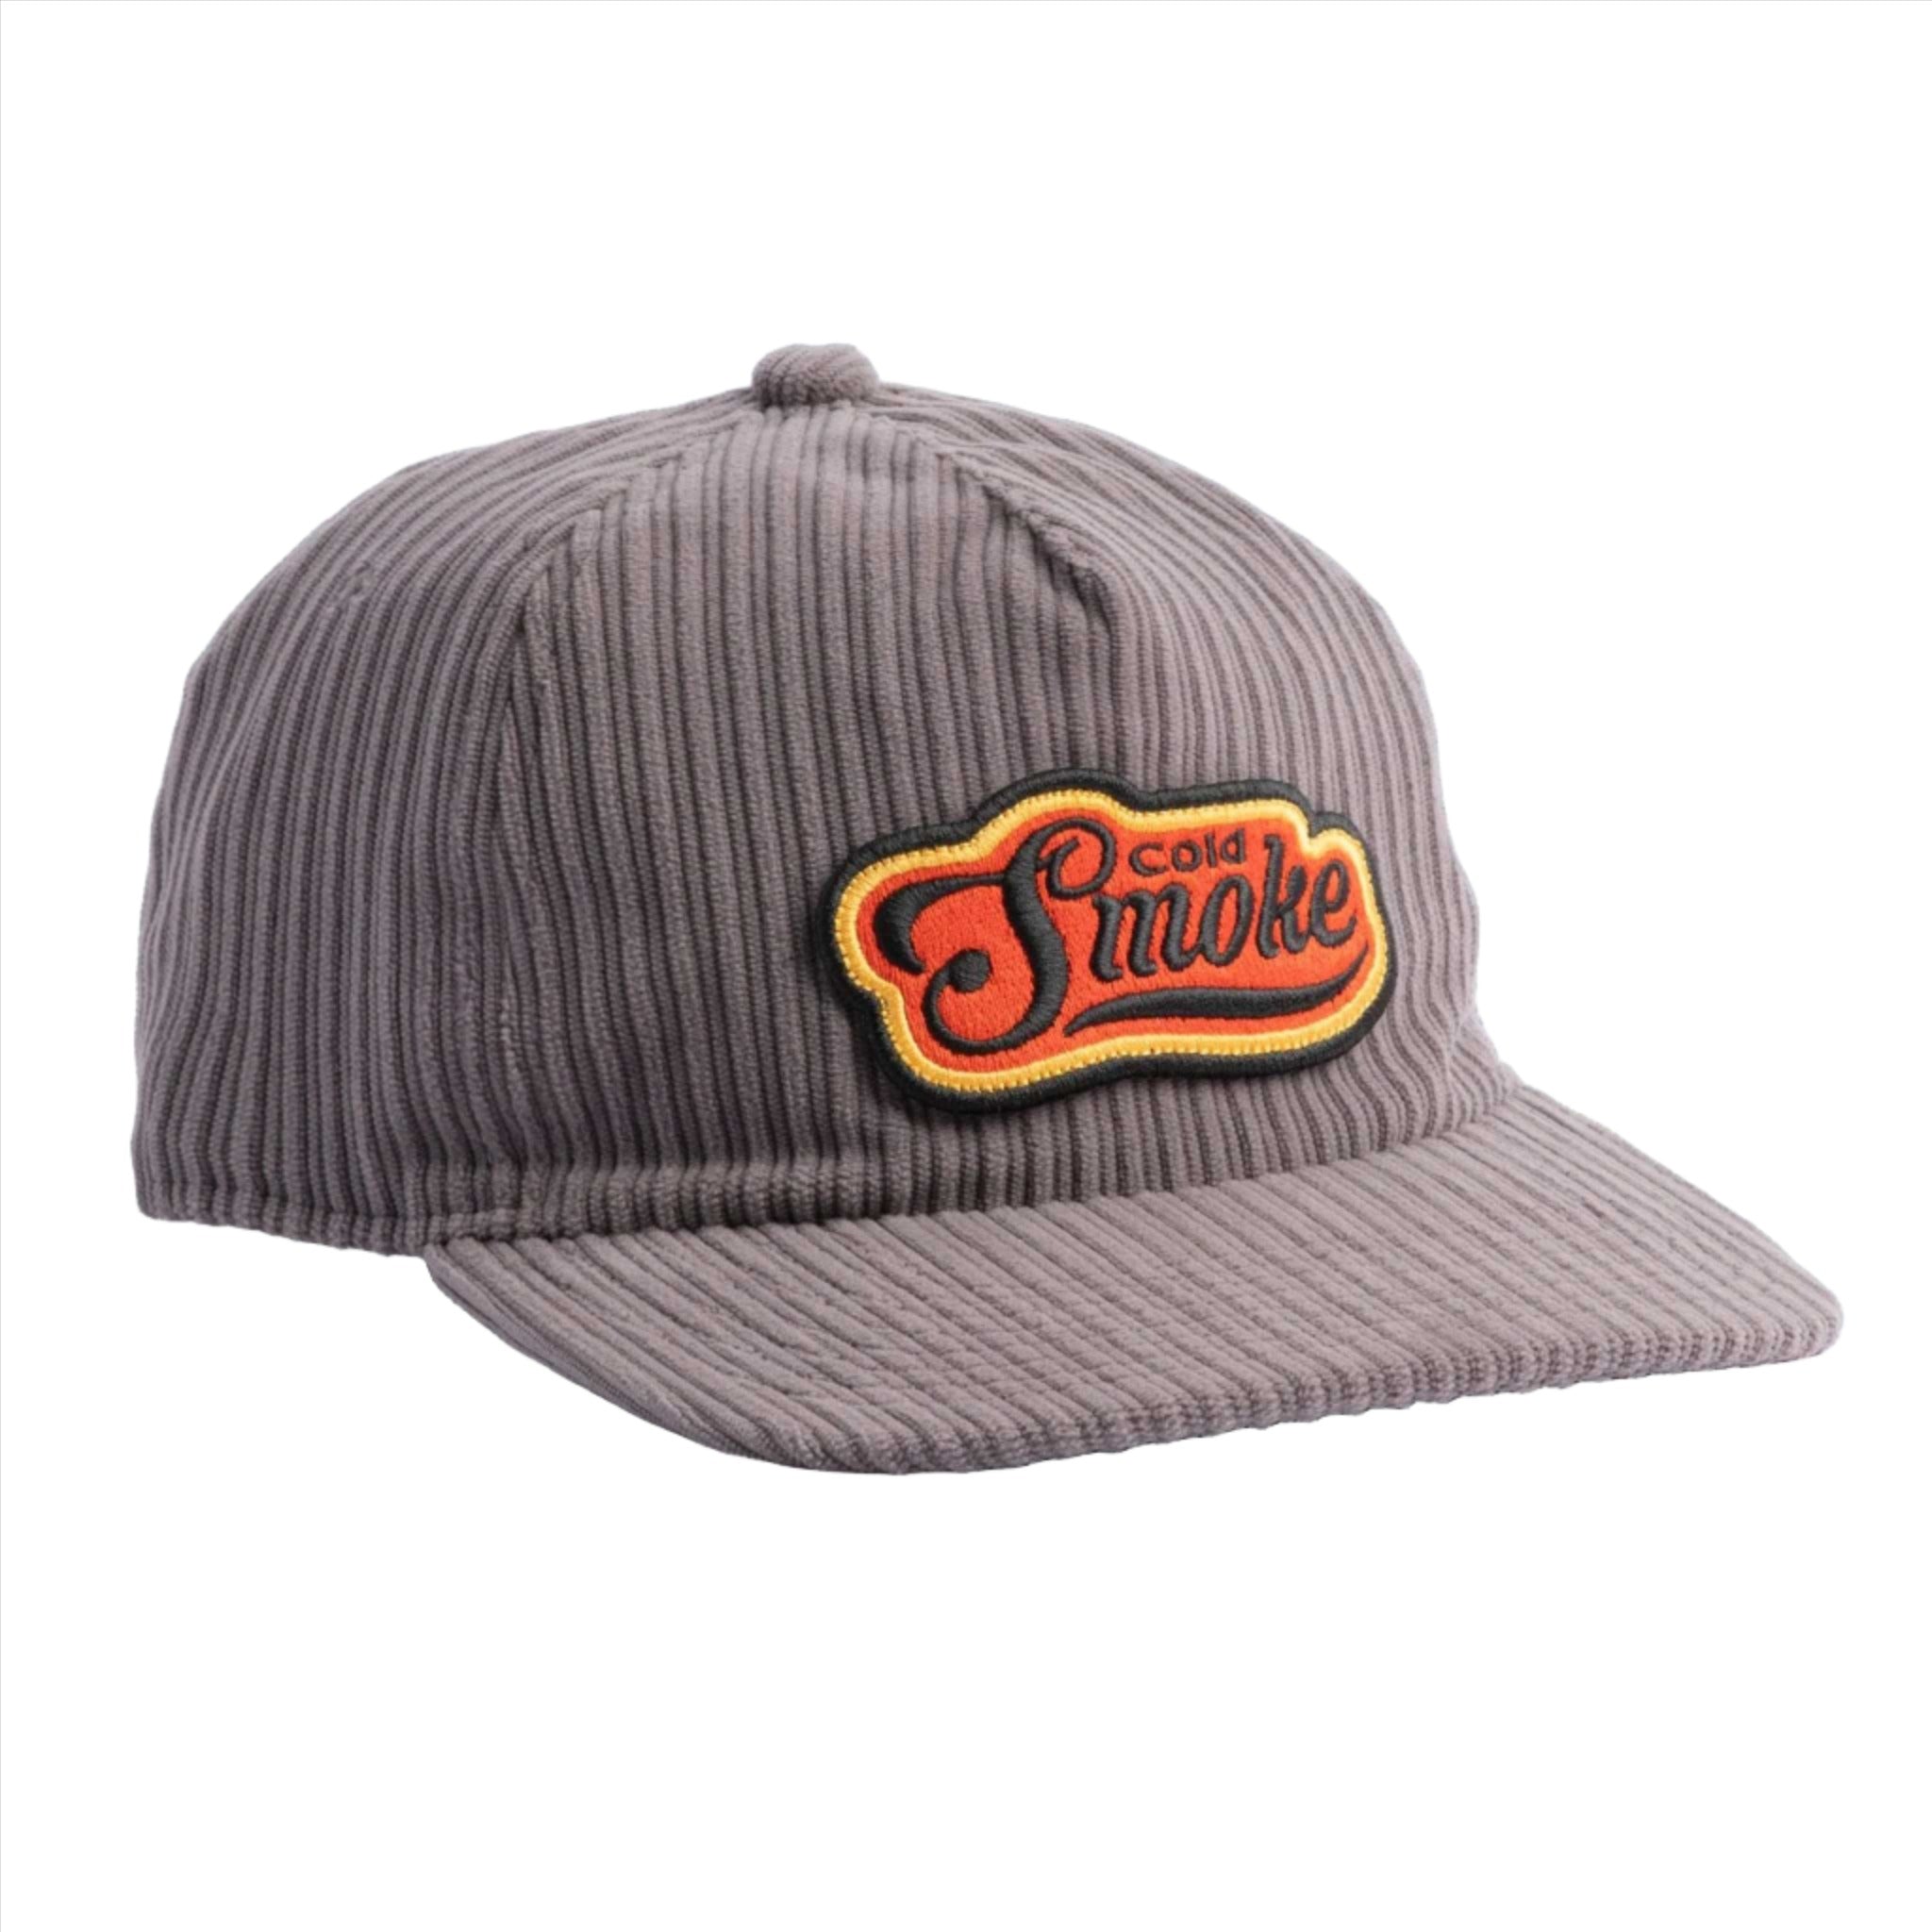 The Rally Cry Low Profile Corduroy Cap